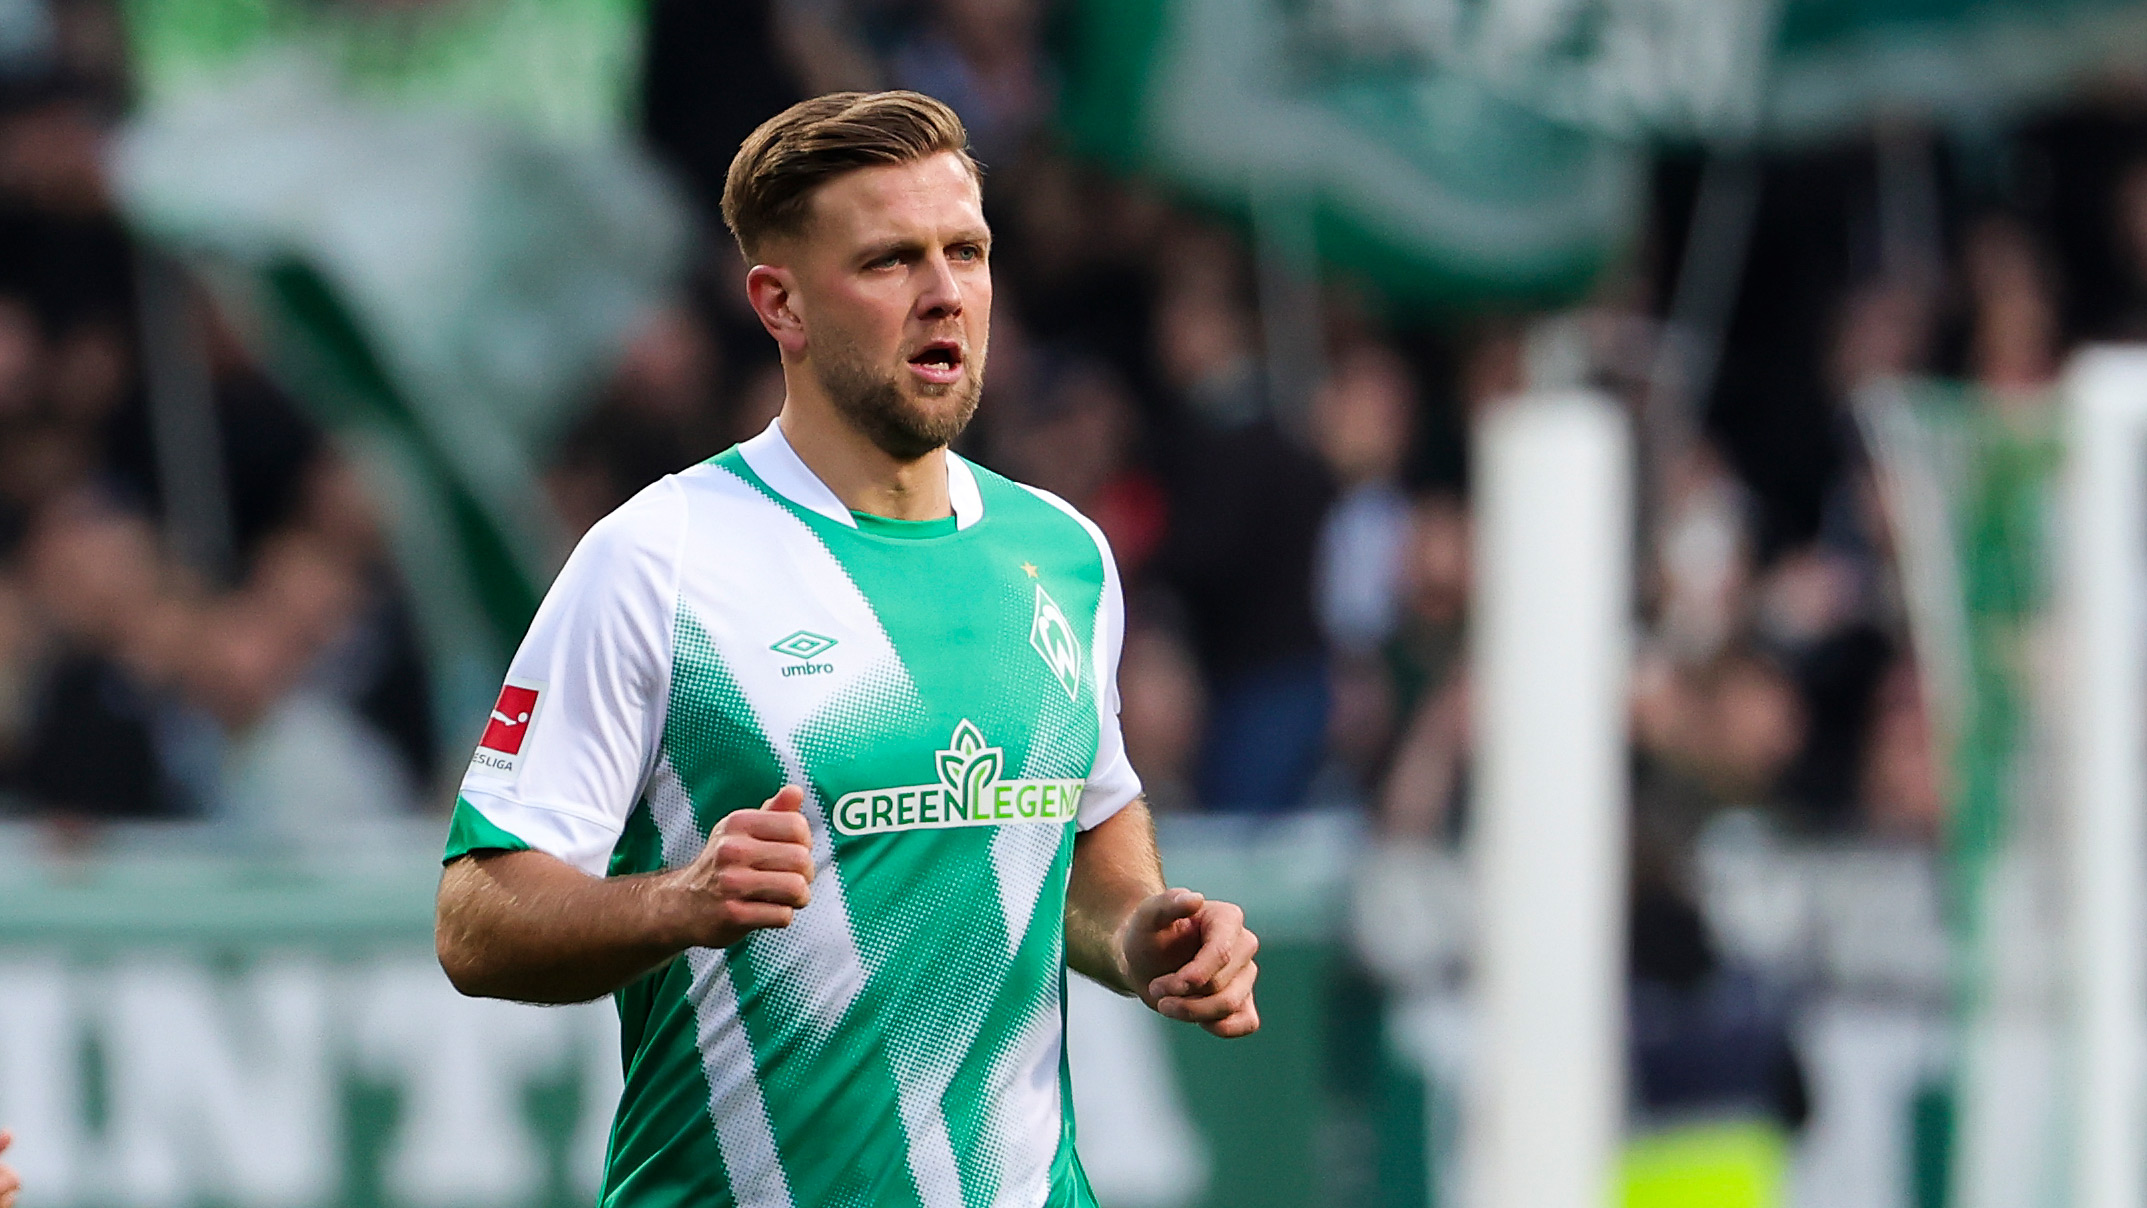 Germany international Niclas Fullkrug has neither ruled out staying at Werder Bremen for another season, nor strengthened his exit links at the club.